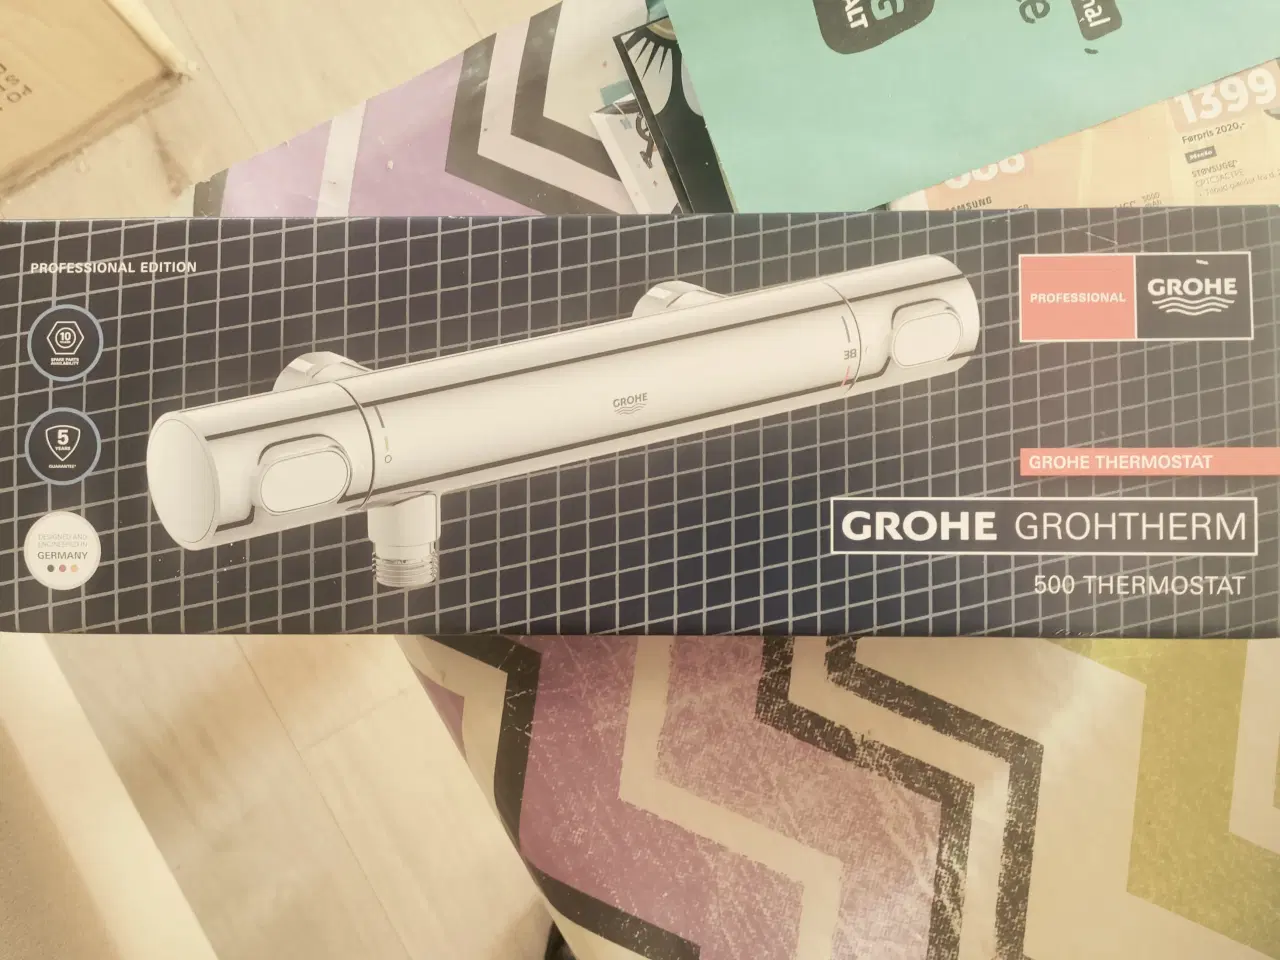 Billede 3 - Grohe grohtherm